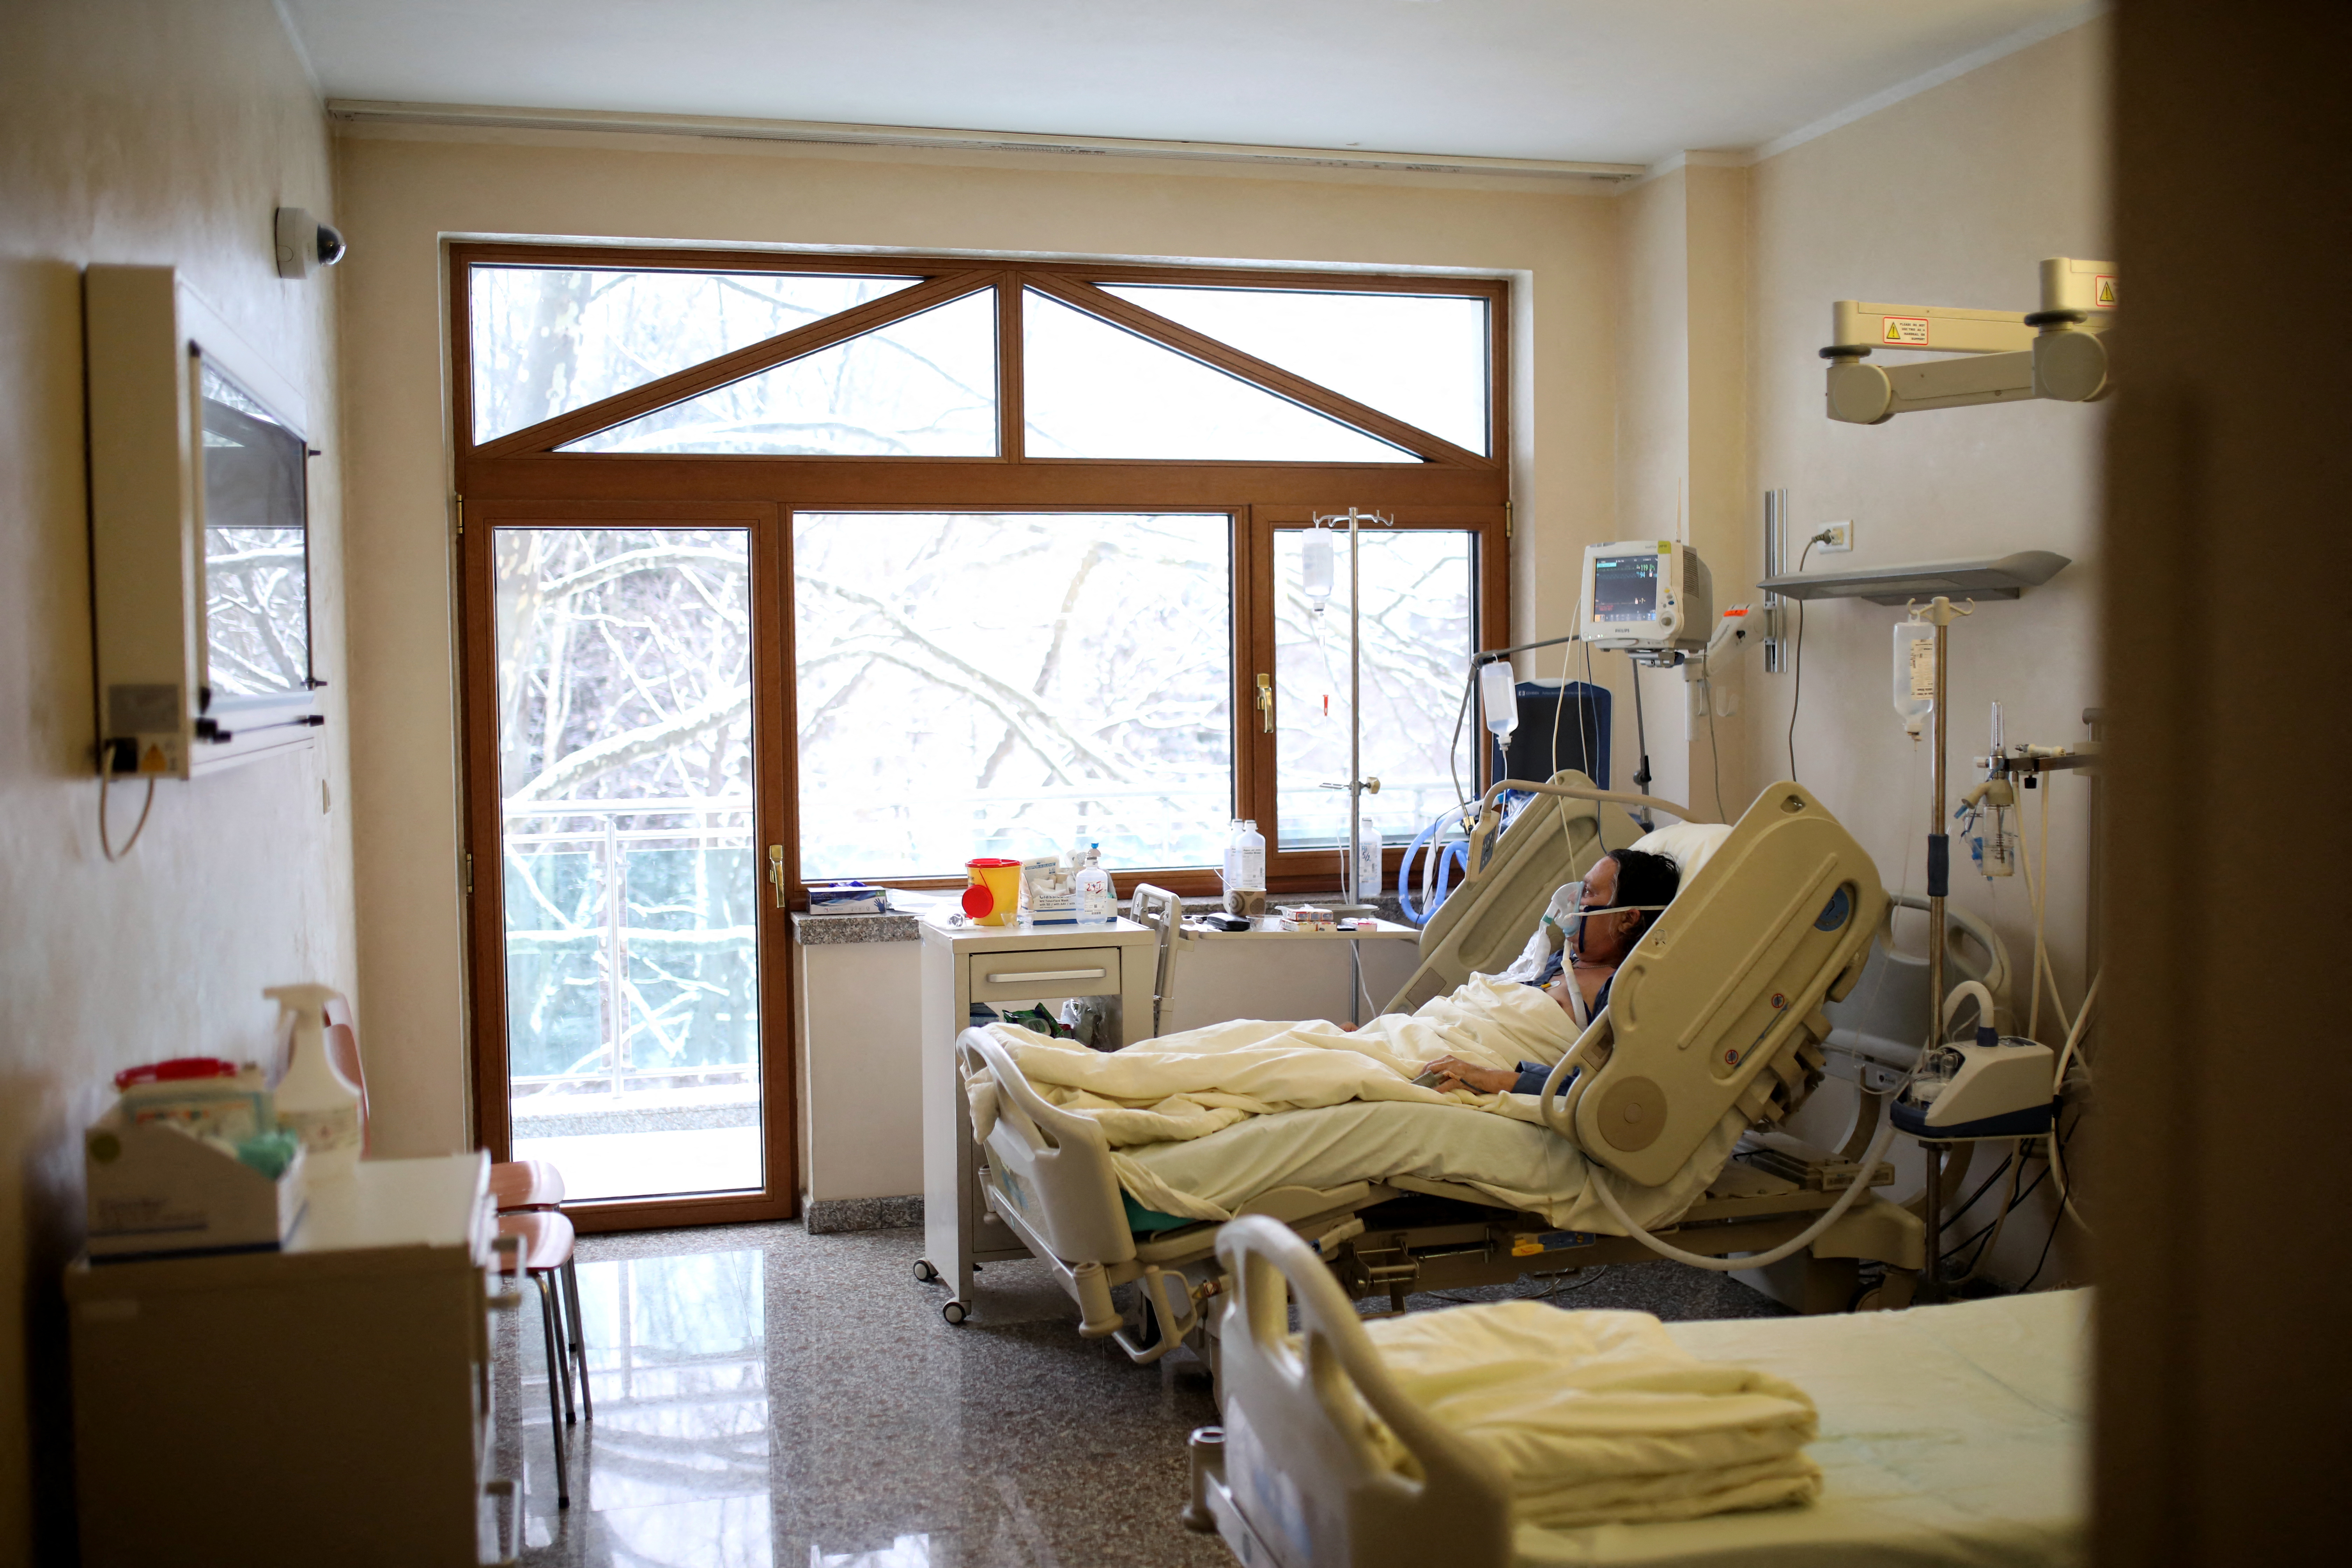 Intensive Care Unit (ICU) for COVID-19 patients at Lozenetz hospital